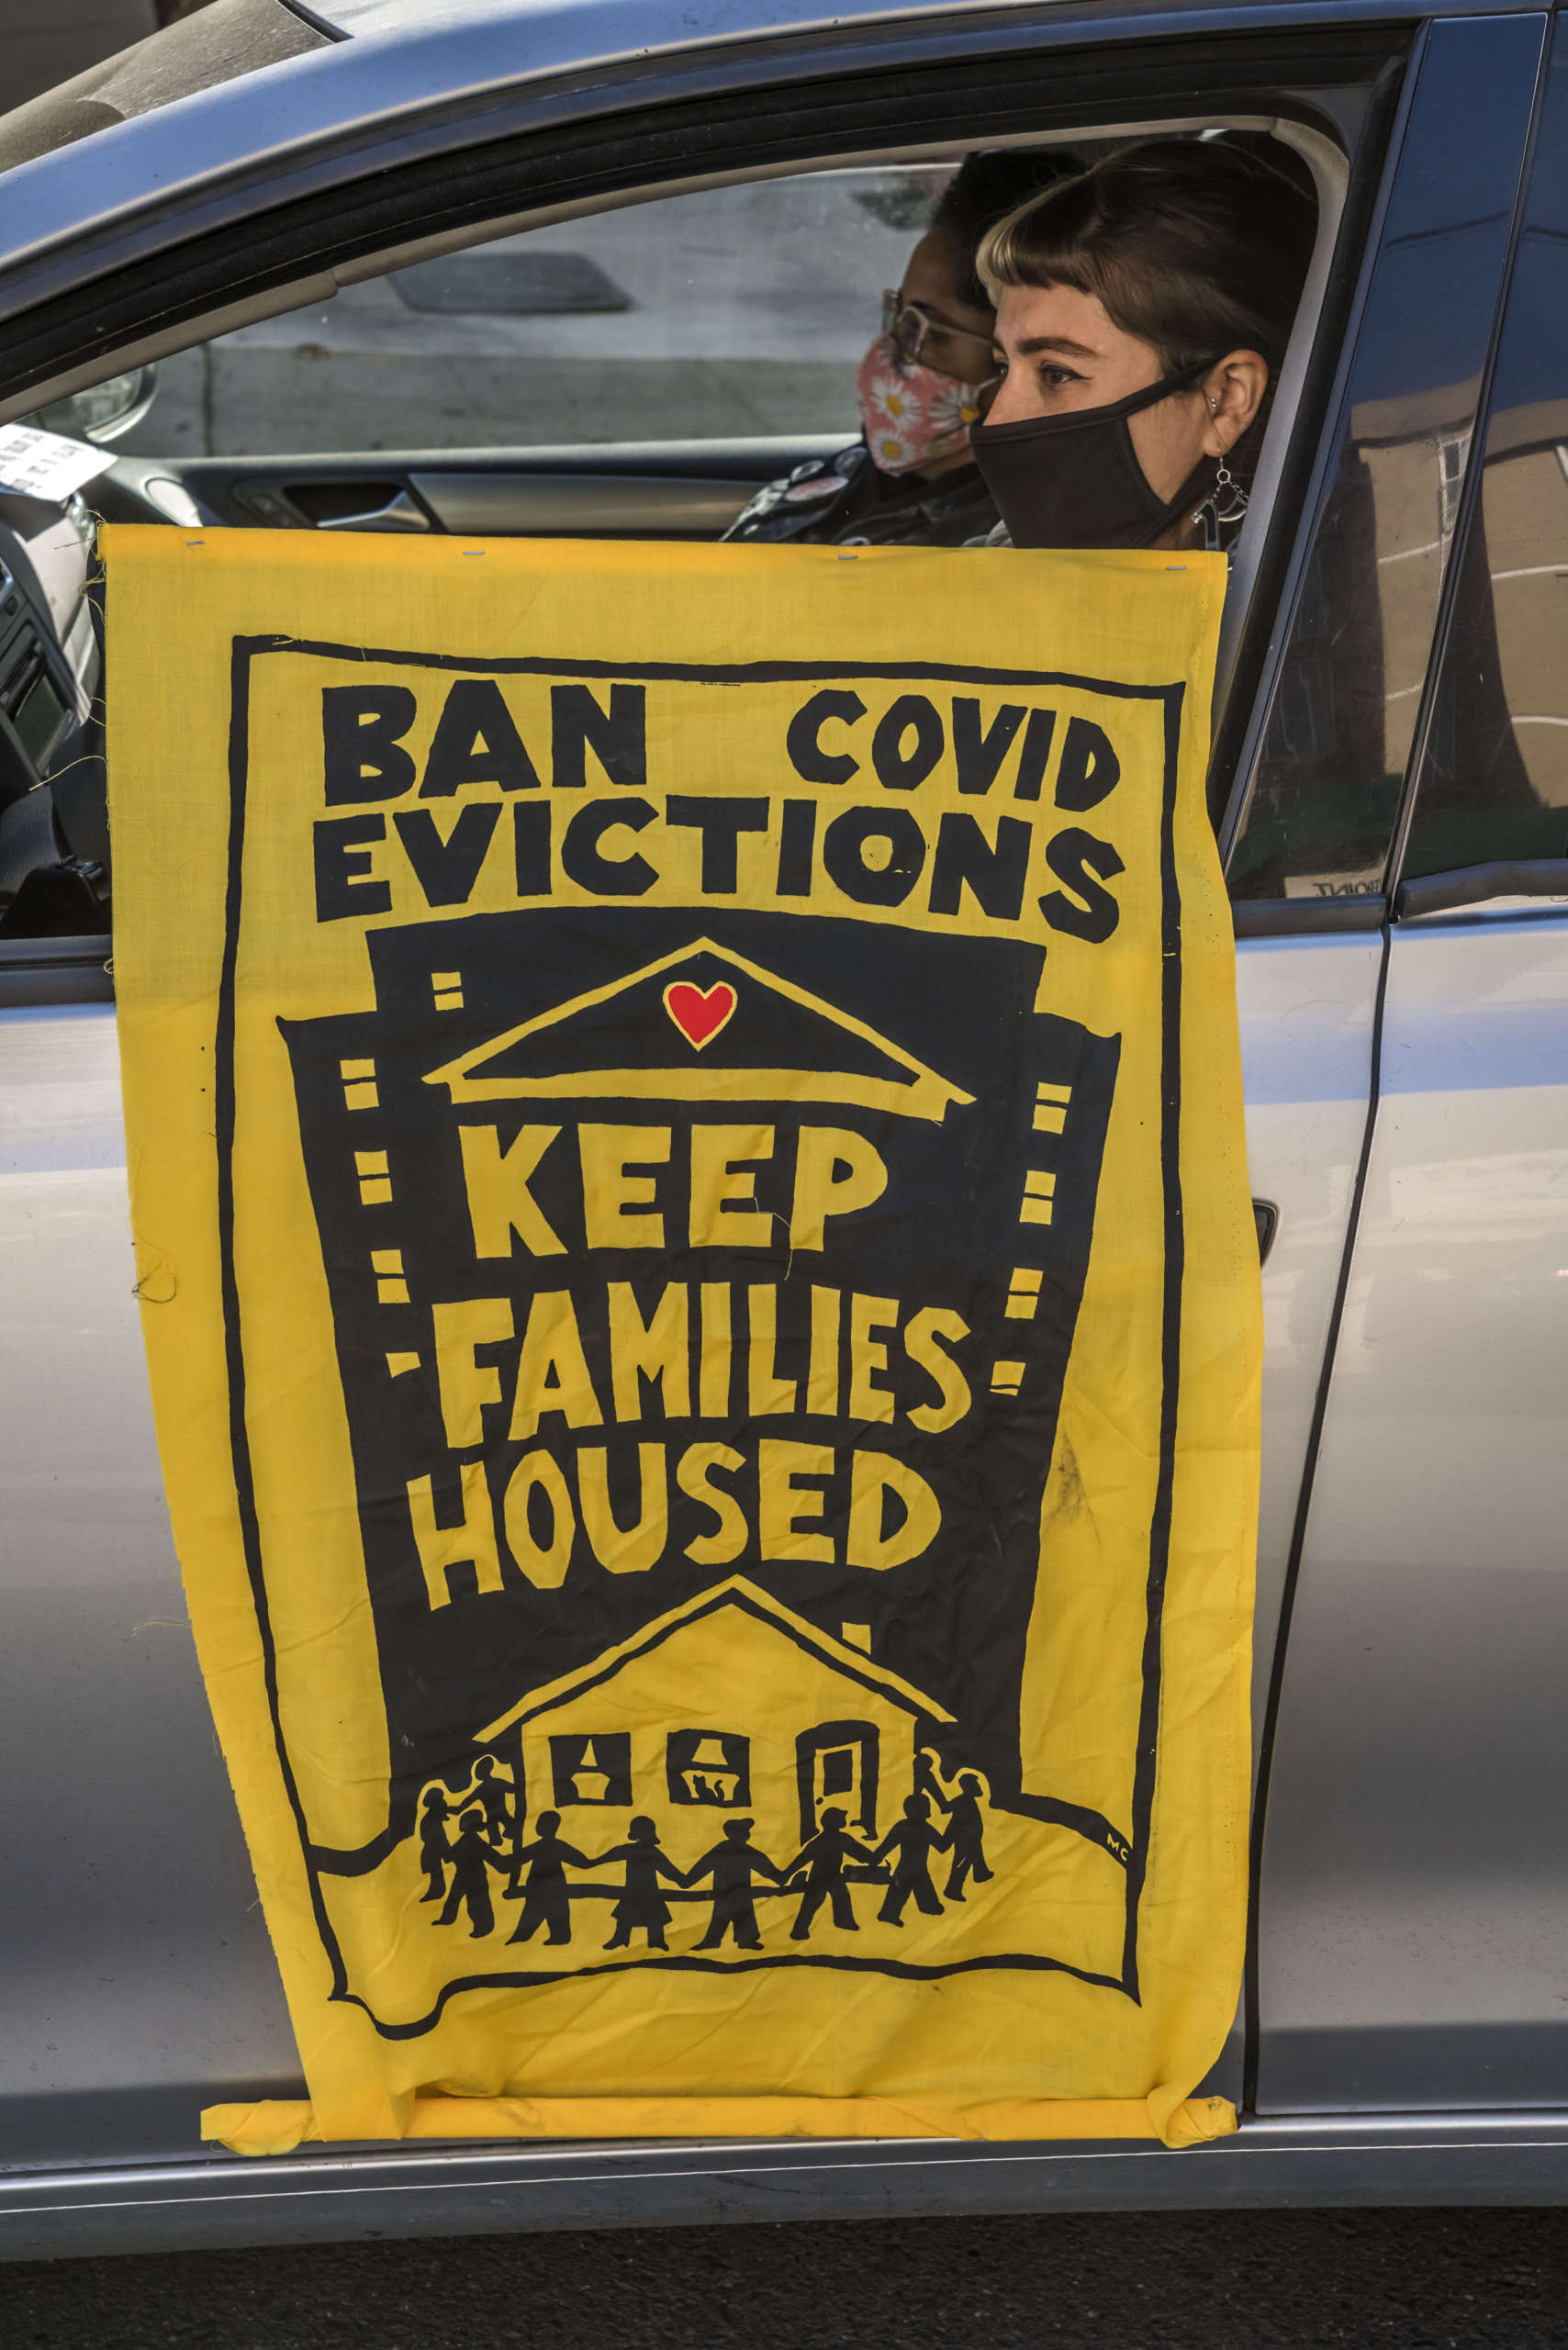 The banner produced by the caravan organizers taped to a car door.